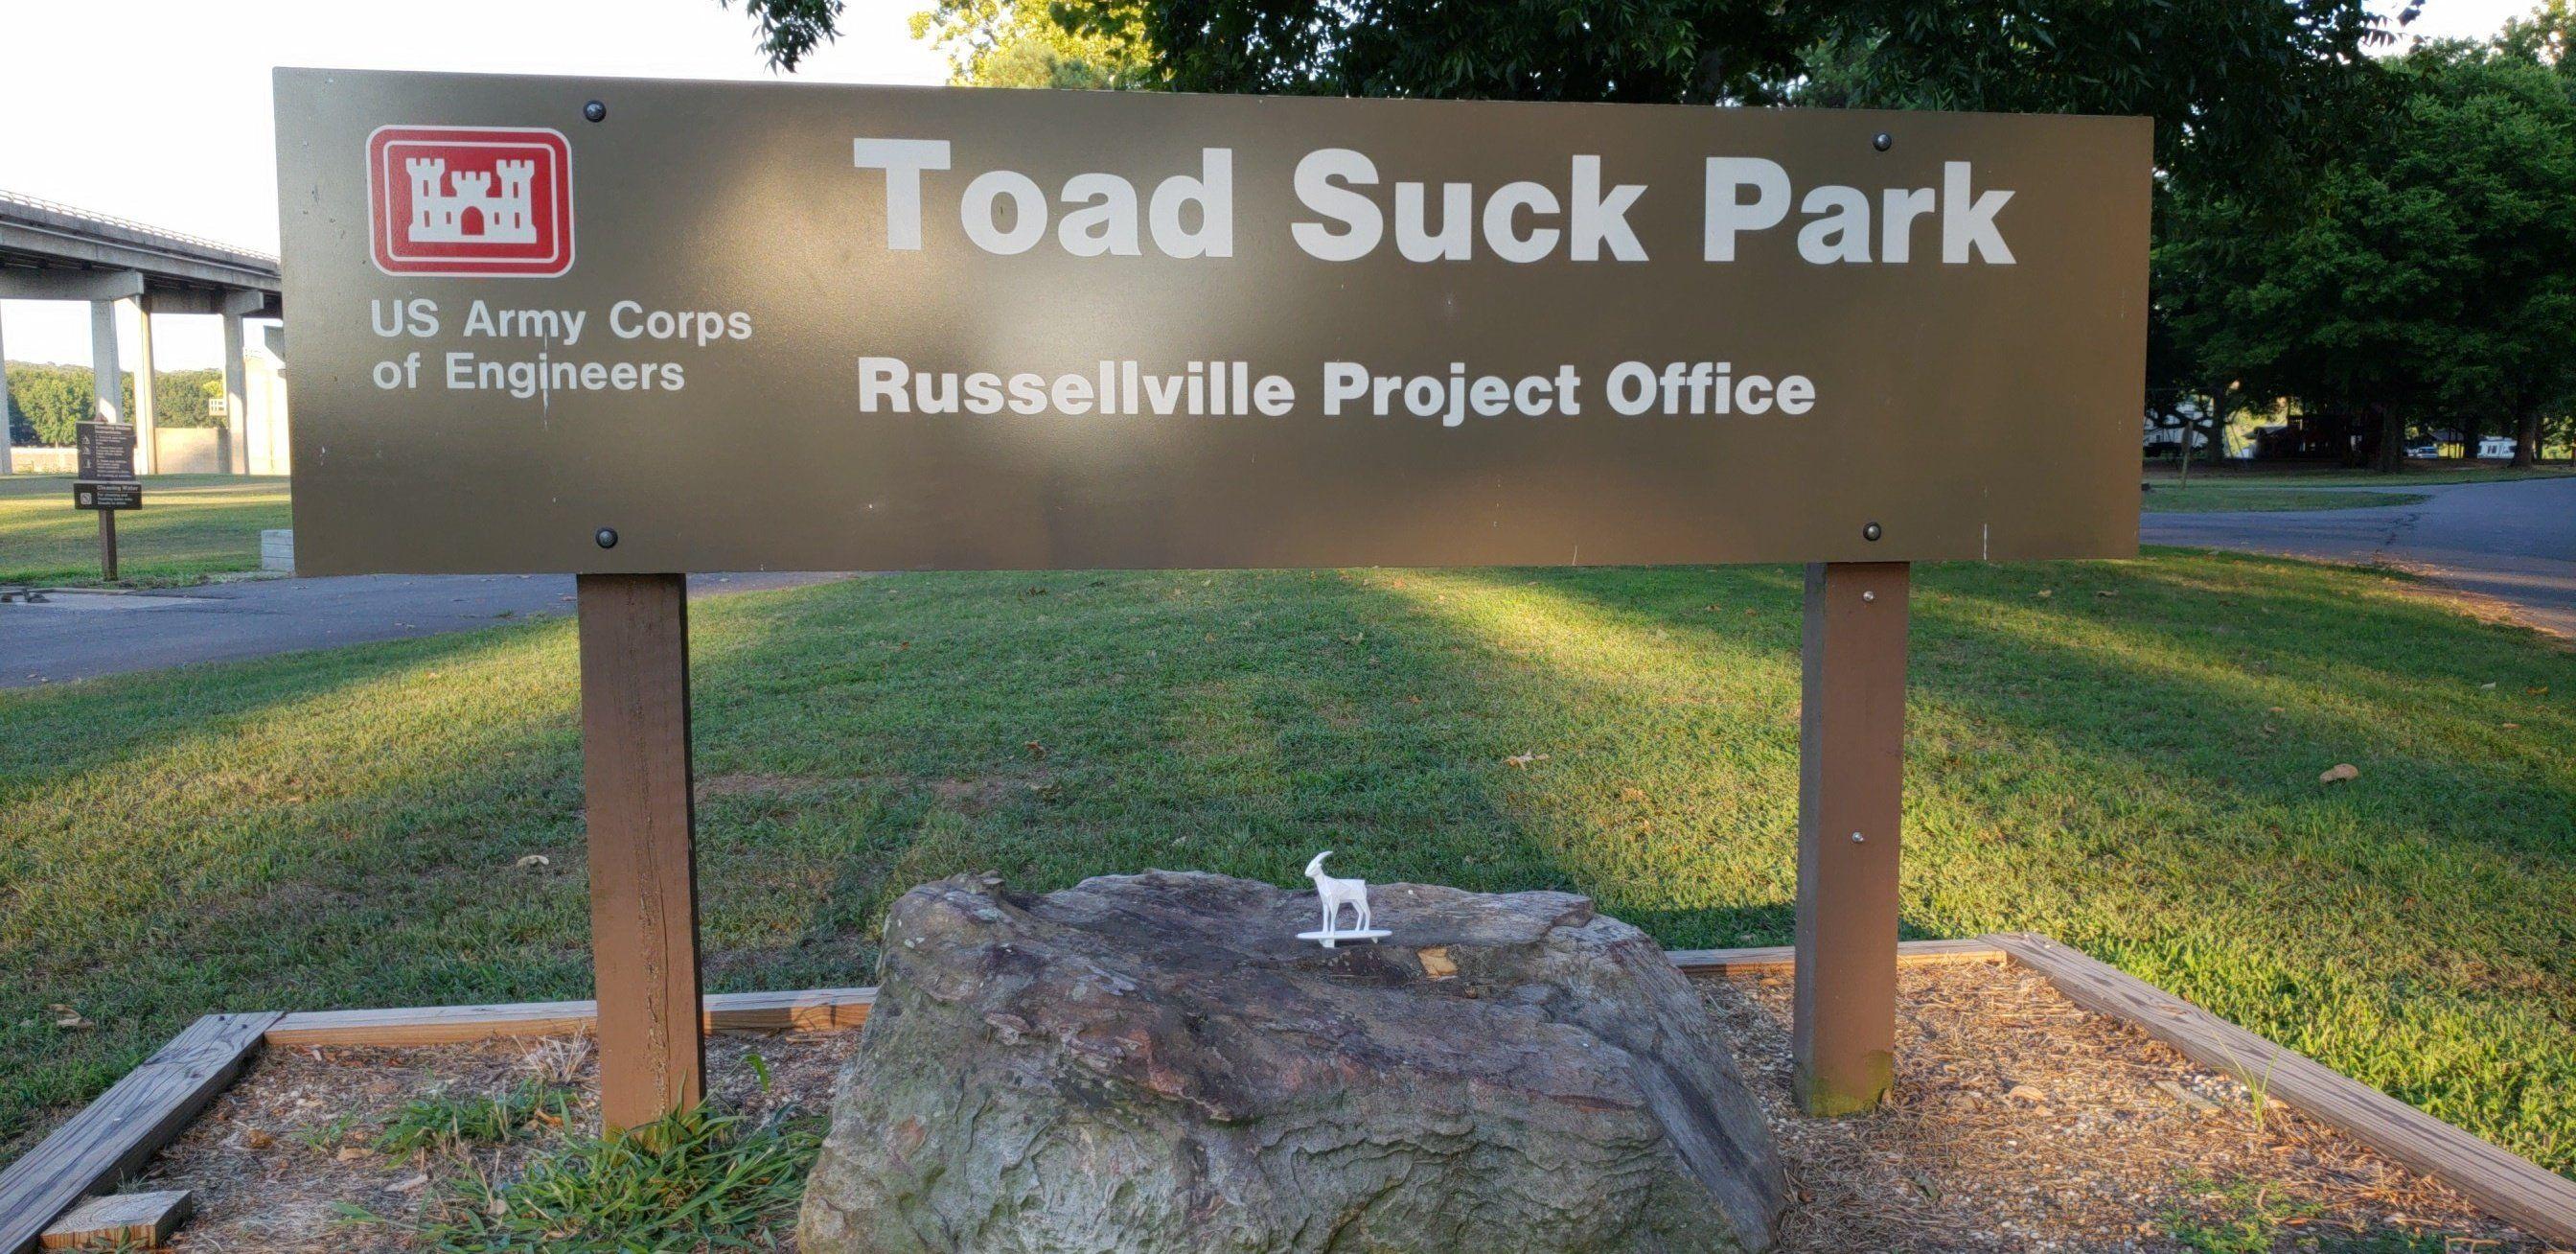 Olympus reccomend Reserve toad suck park in conway